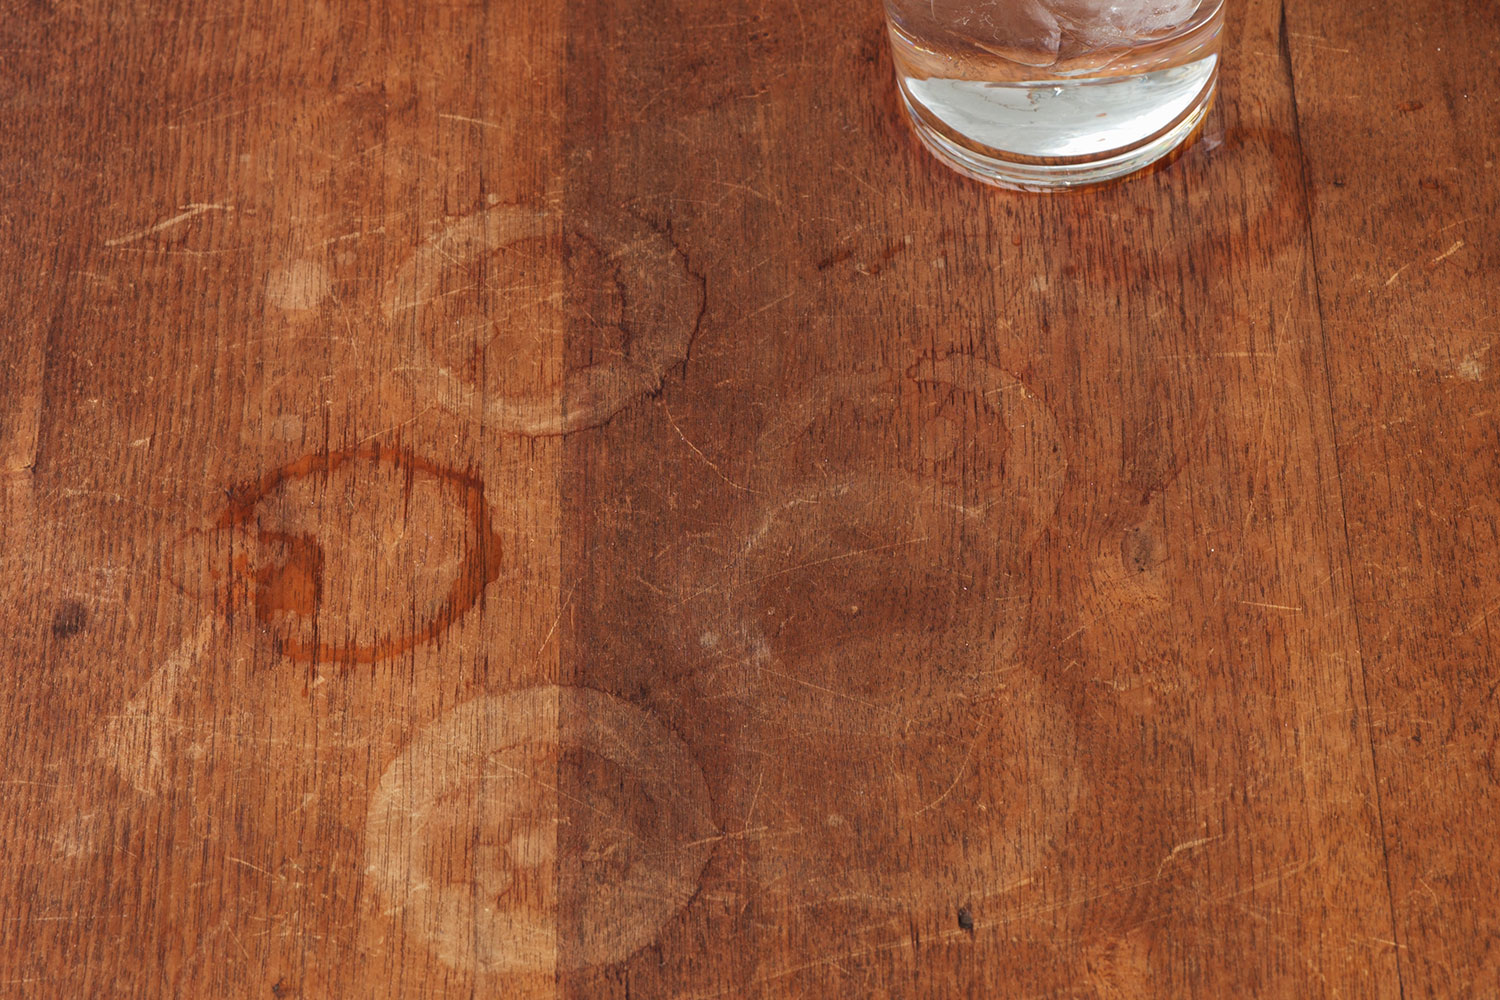 How To Remove Water Stains From Wood Better Homes And Gardens